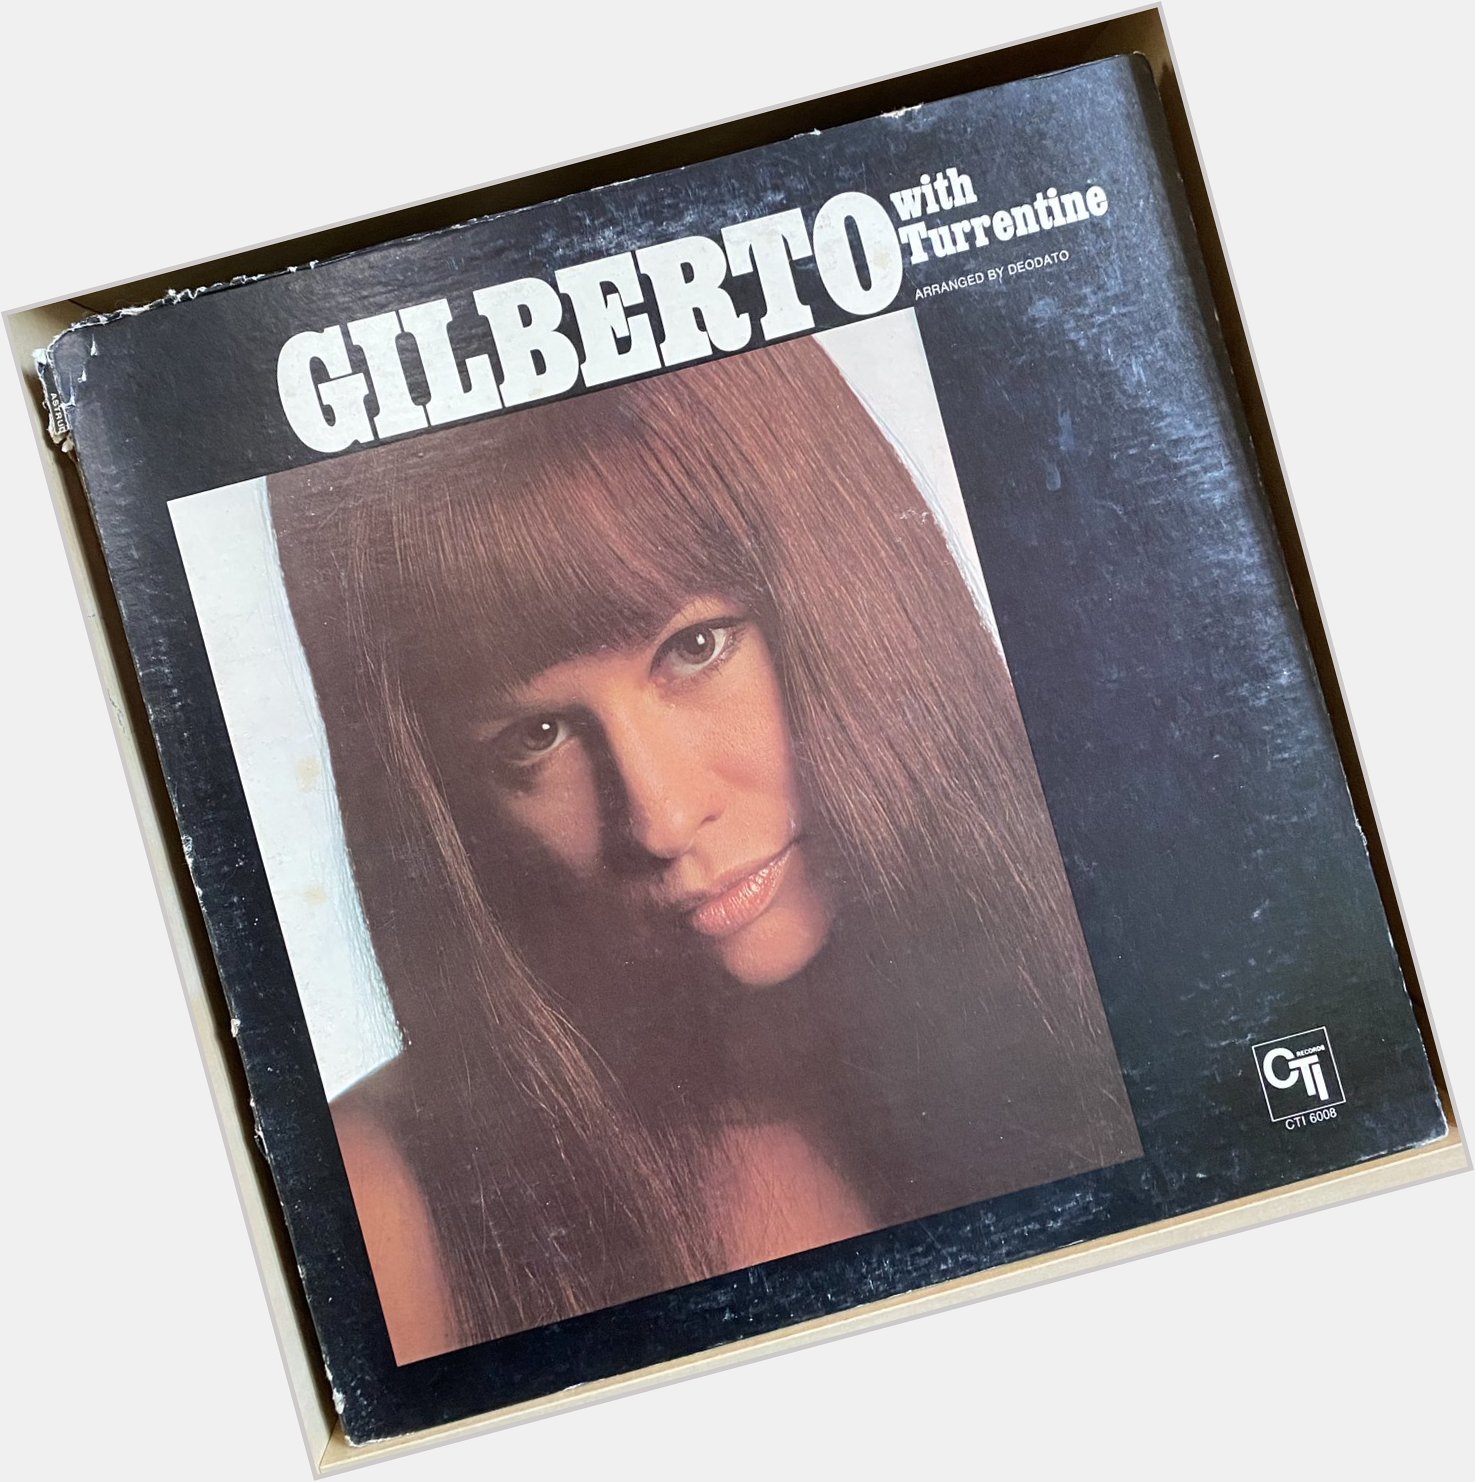 Happy birthday to the one and only Astrud Gilberto. Now playing. Gilberto with Turrentine. 1971. 